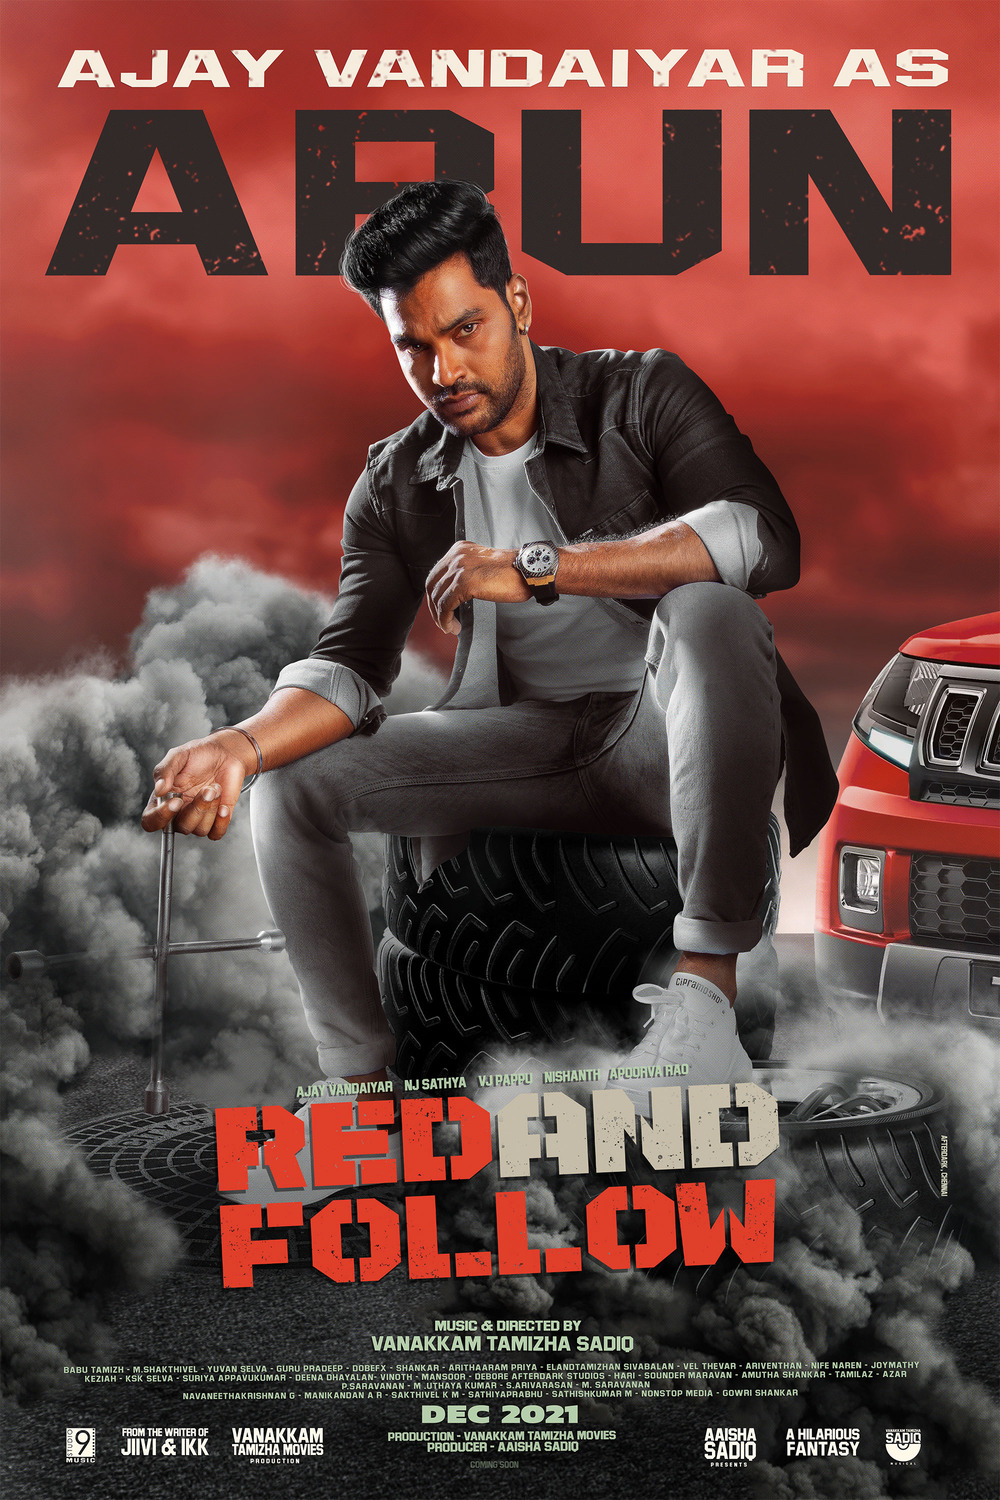 Extra Large Movie Poster Image for Red and Follow (#5 of 6)